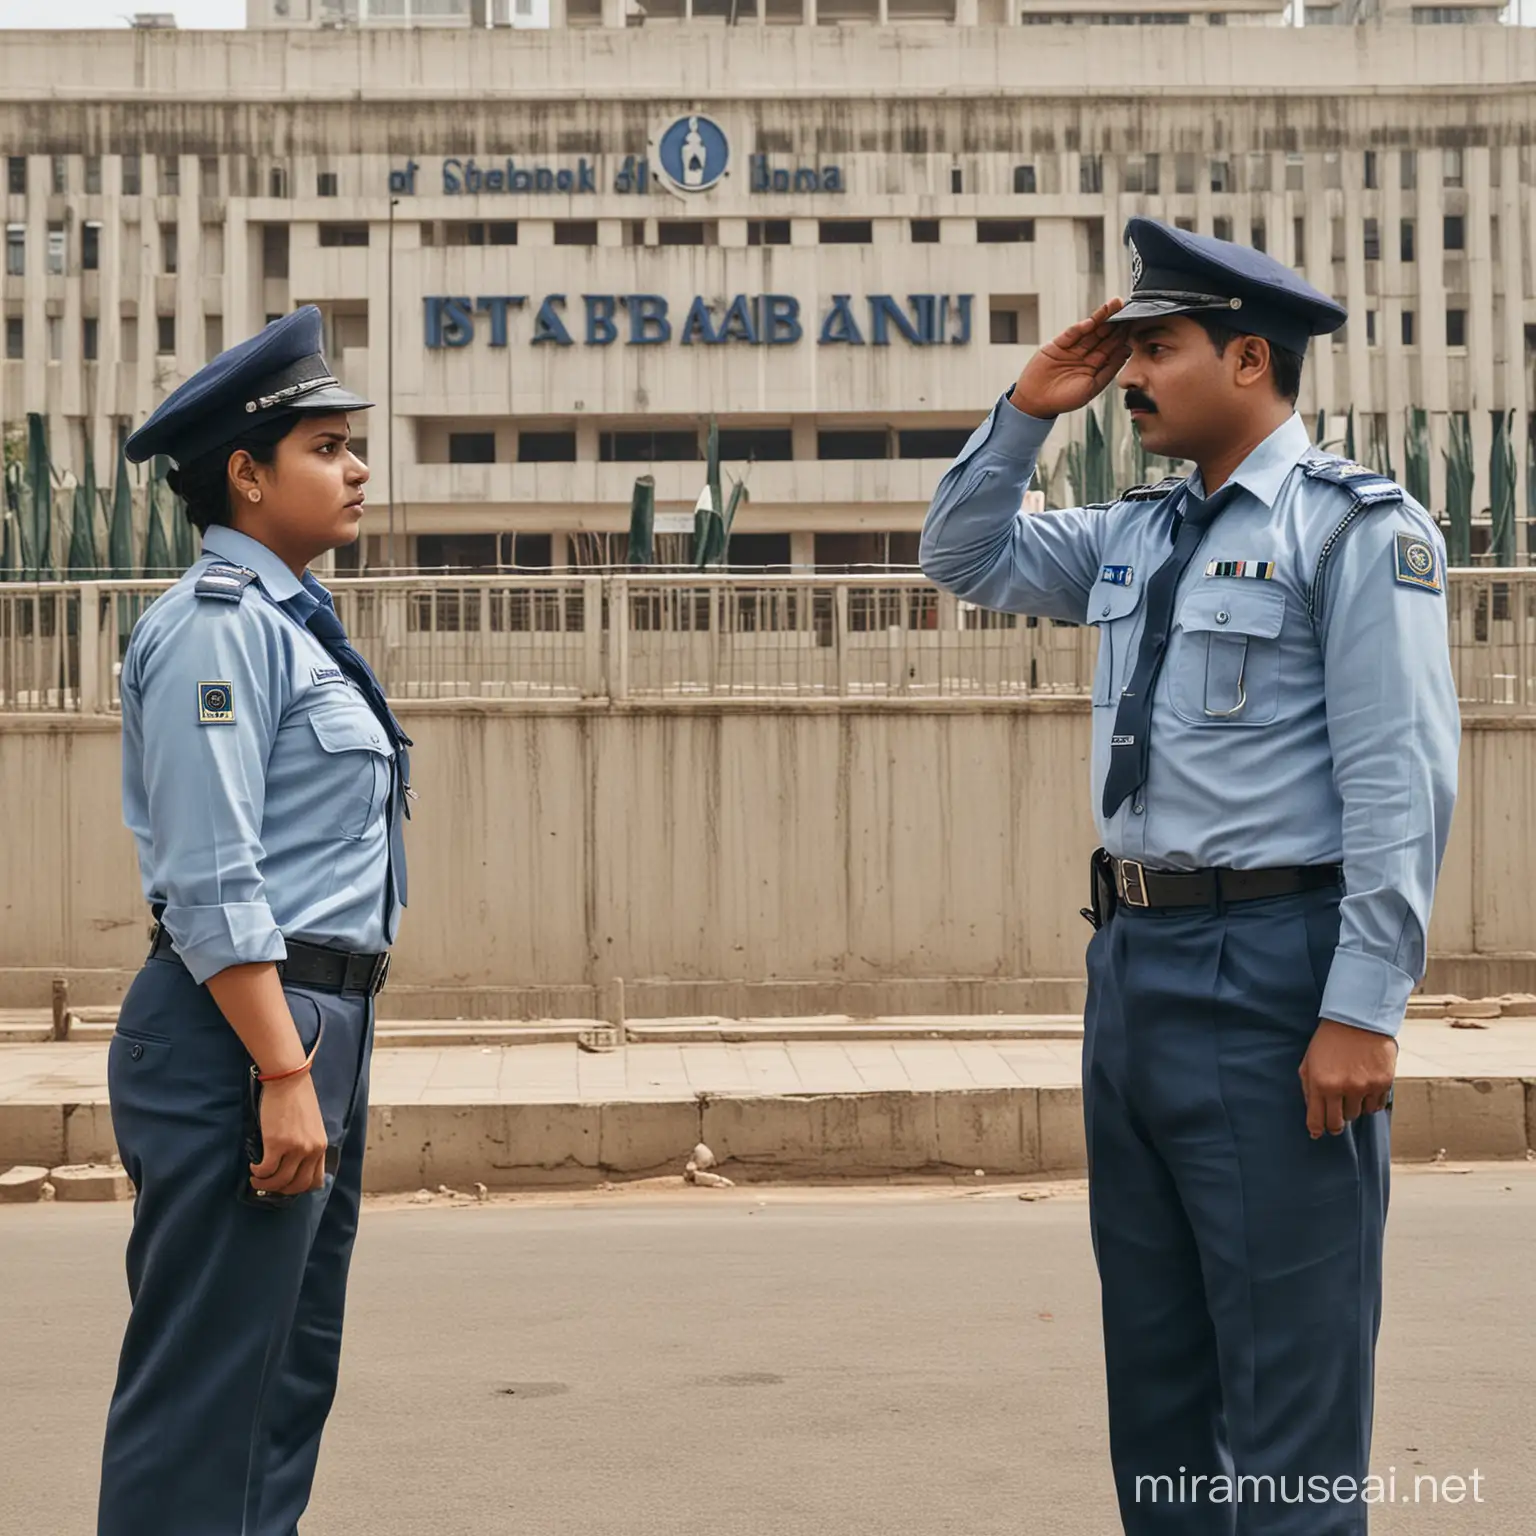 State Bank of India Security Guard Saluting